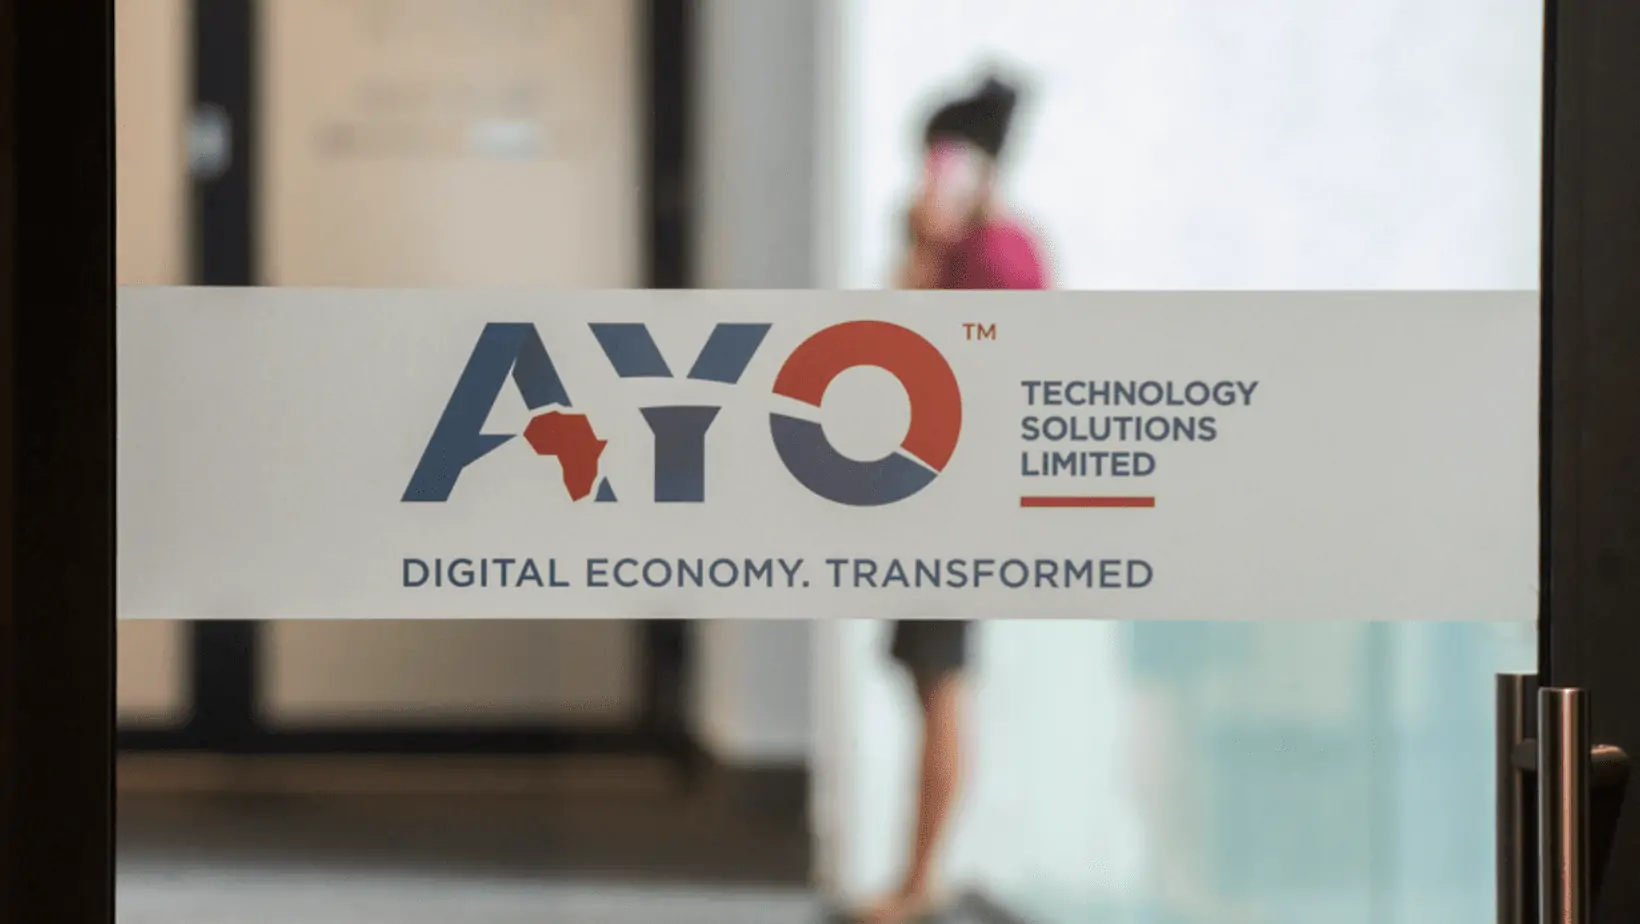 AYO Technology Solutions Limited’s AGM Reveals Shareholder Dissent, Prompts Dialogue for Accountability